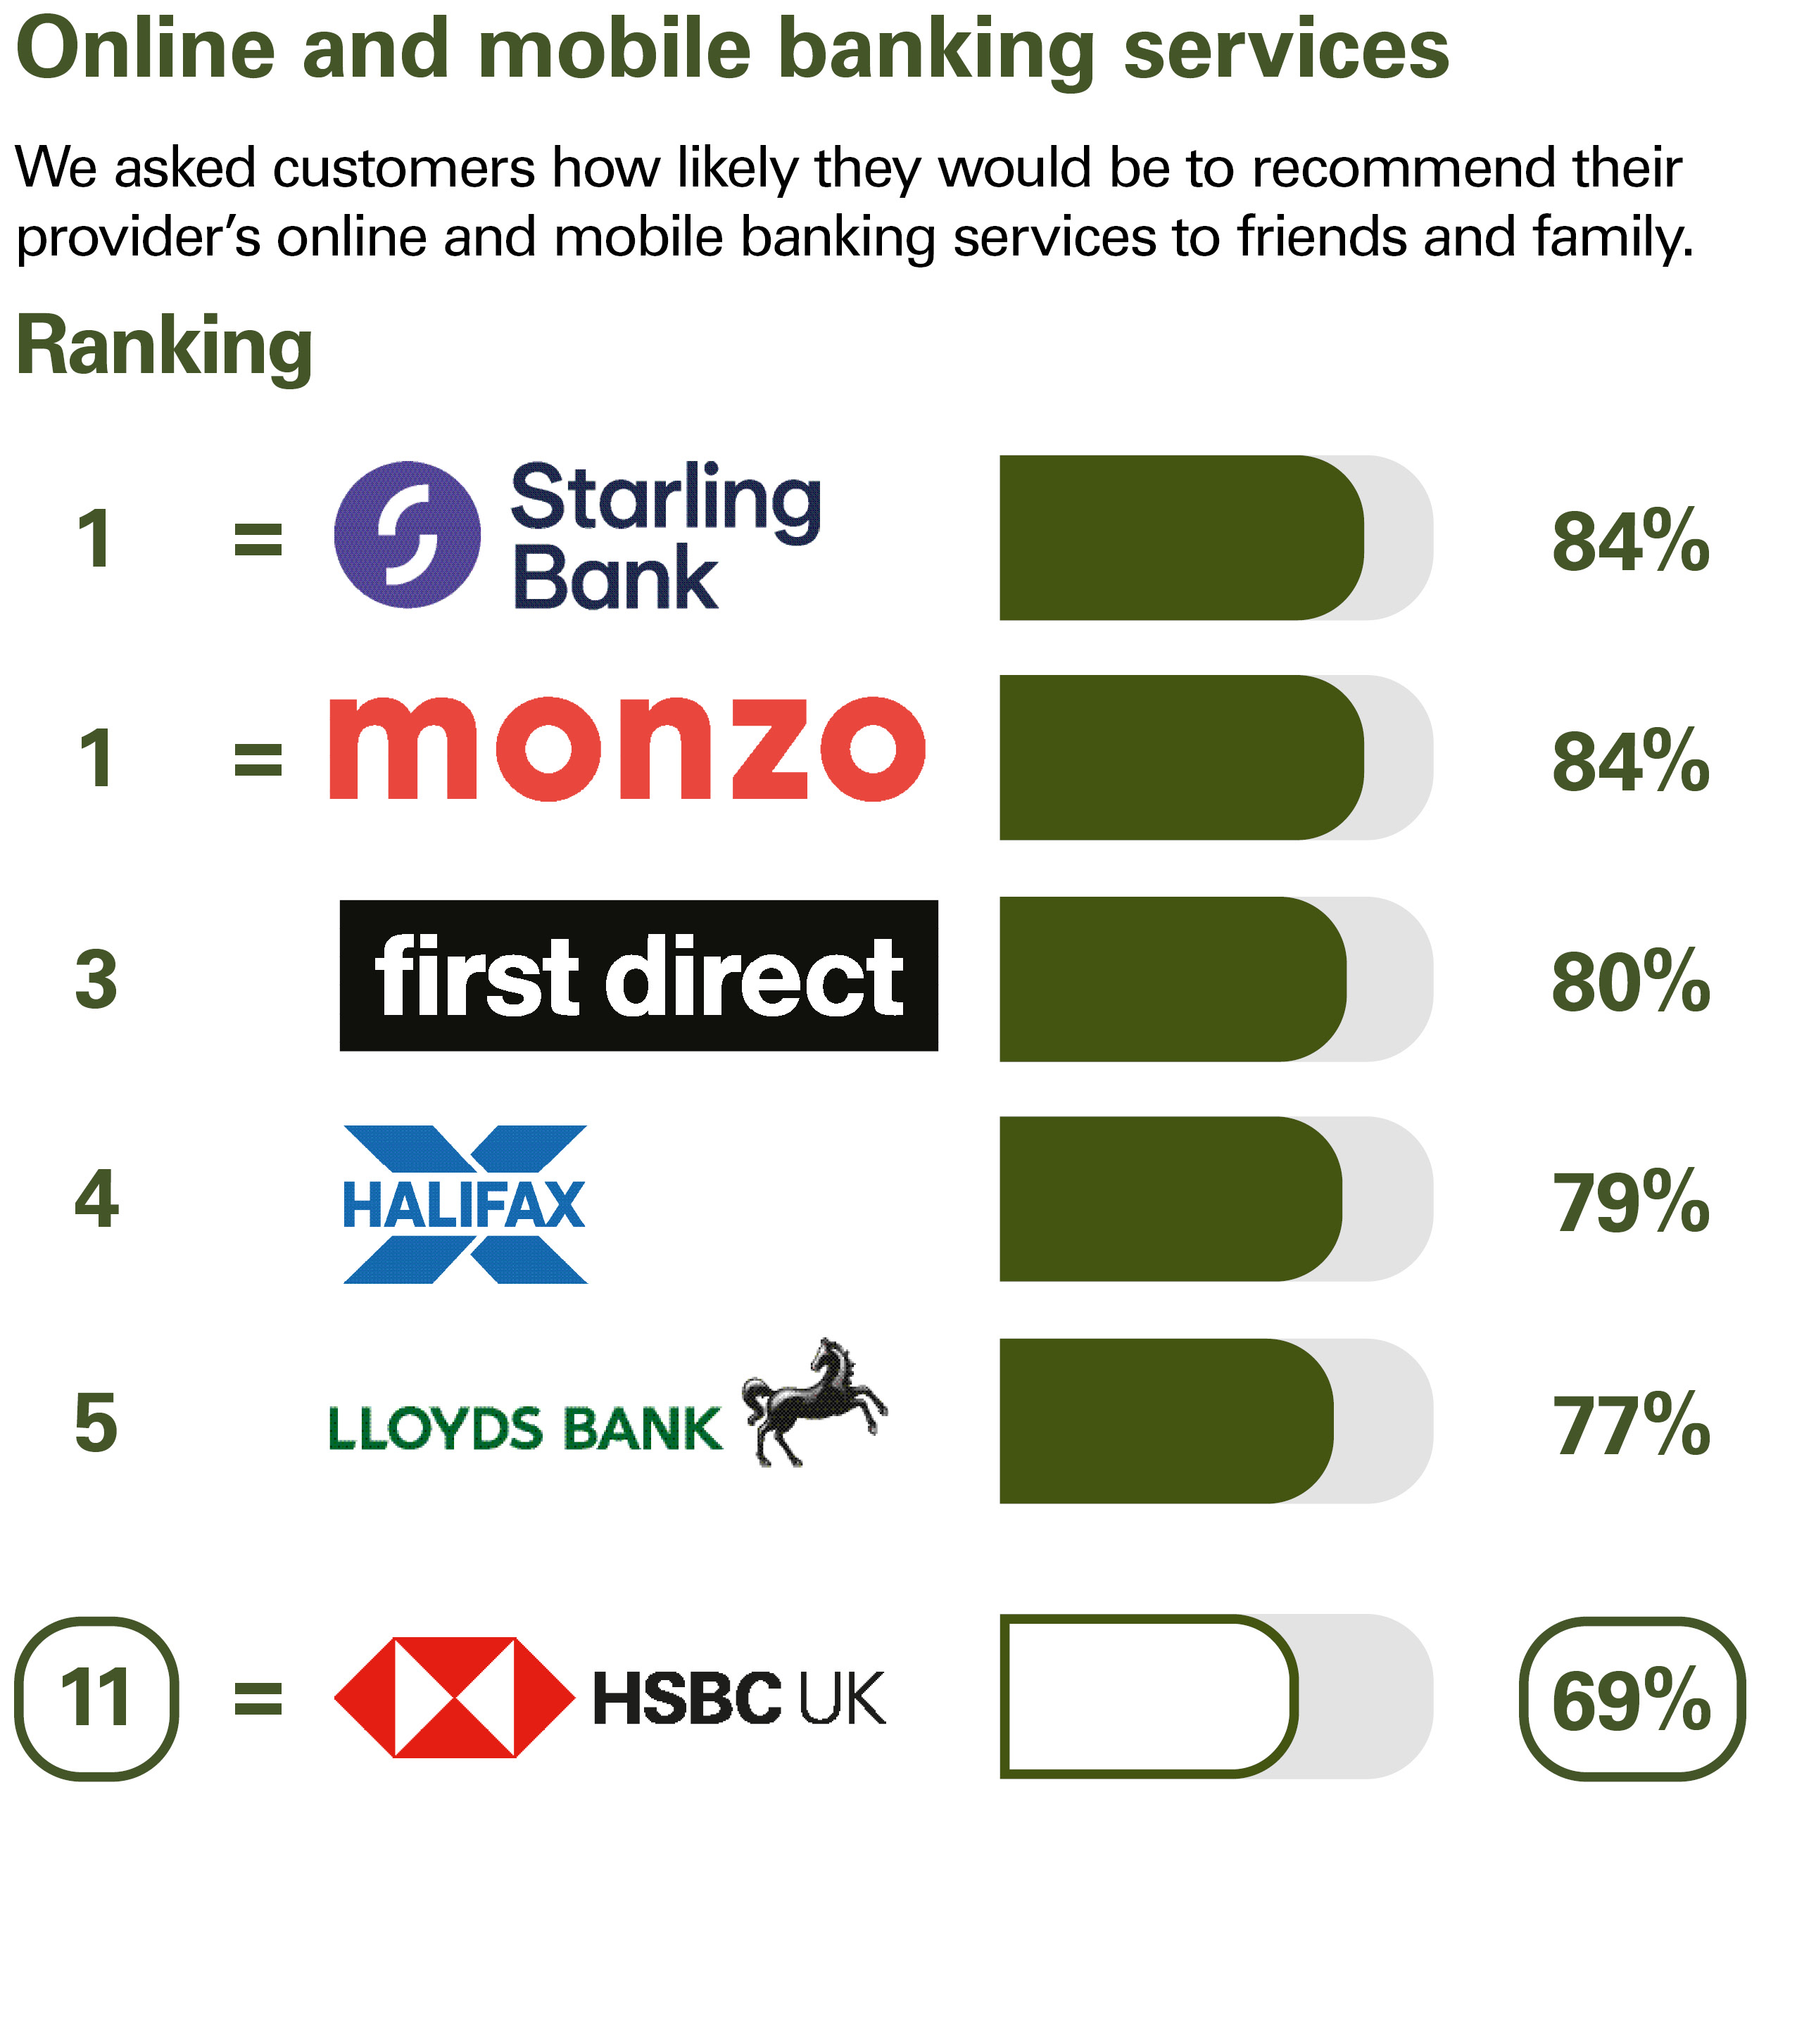 Online and mobile banking services. We asked customers how likely they would be to recommend their provider’s online and mobile banking services to friends and family. Ranking: equal 1 Starling Bank 84% equal 1 Monzo 84% 3 first direct 80% 4 Halifax 79% 5 Lloyds Bank 77% equal 11 HSBC UK 69%.